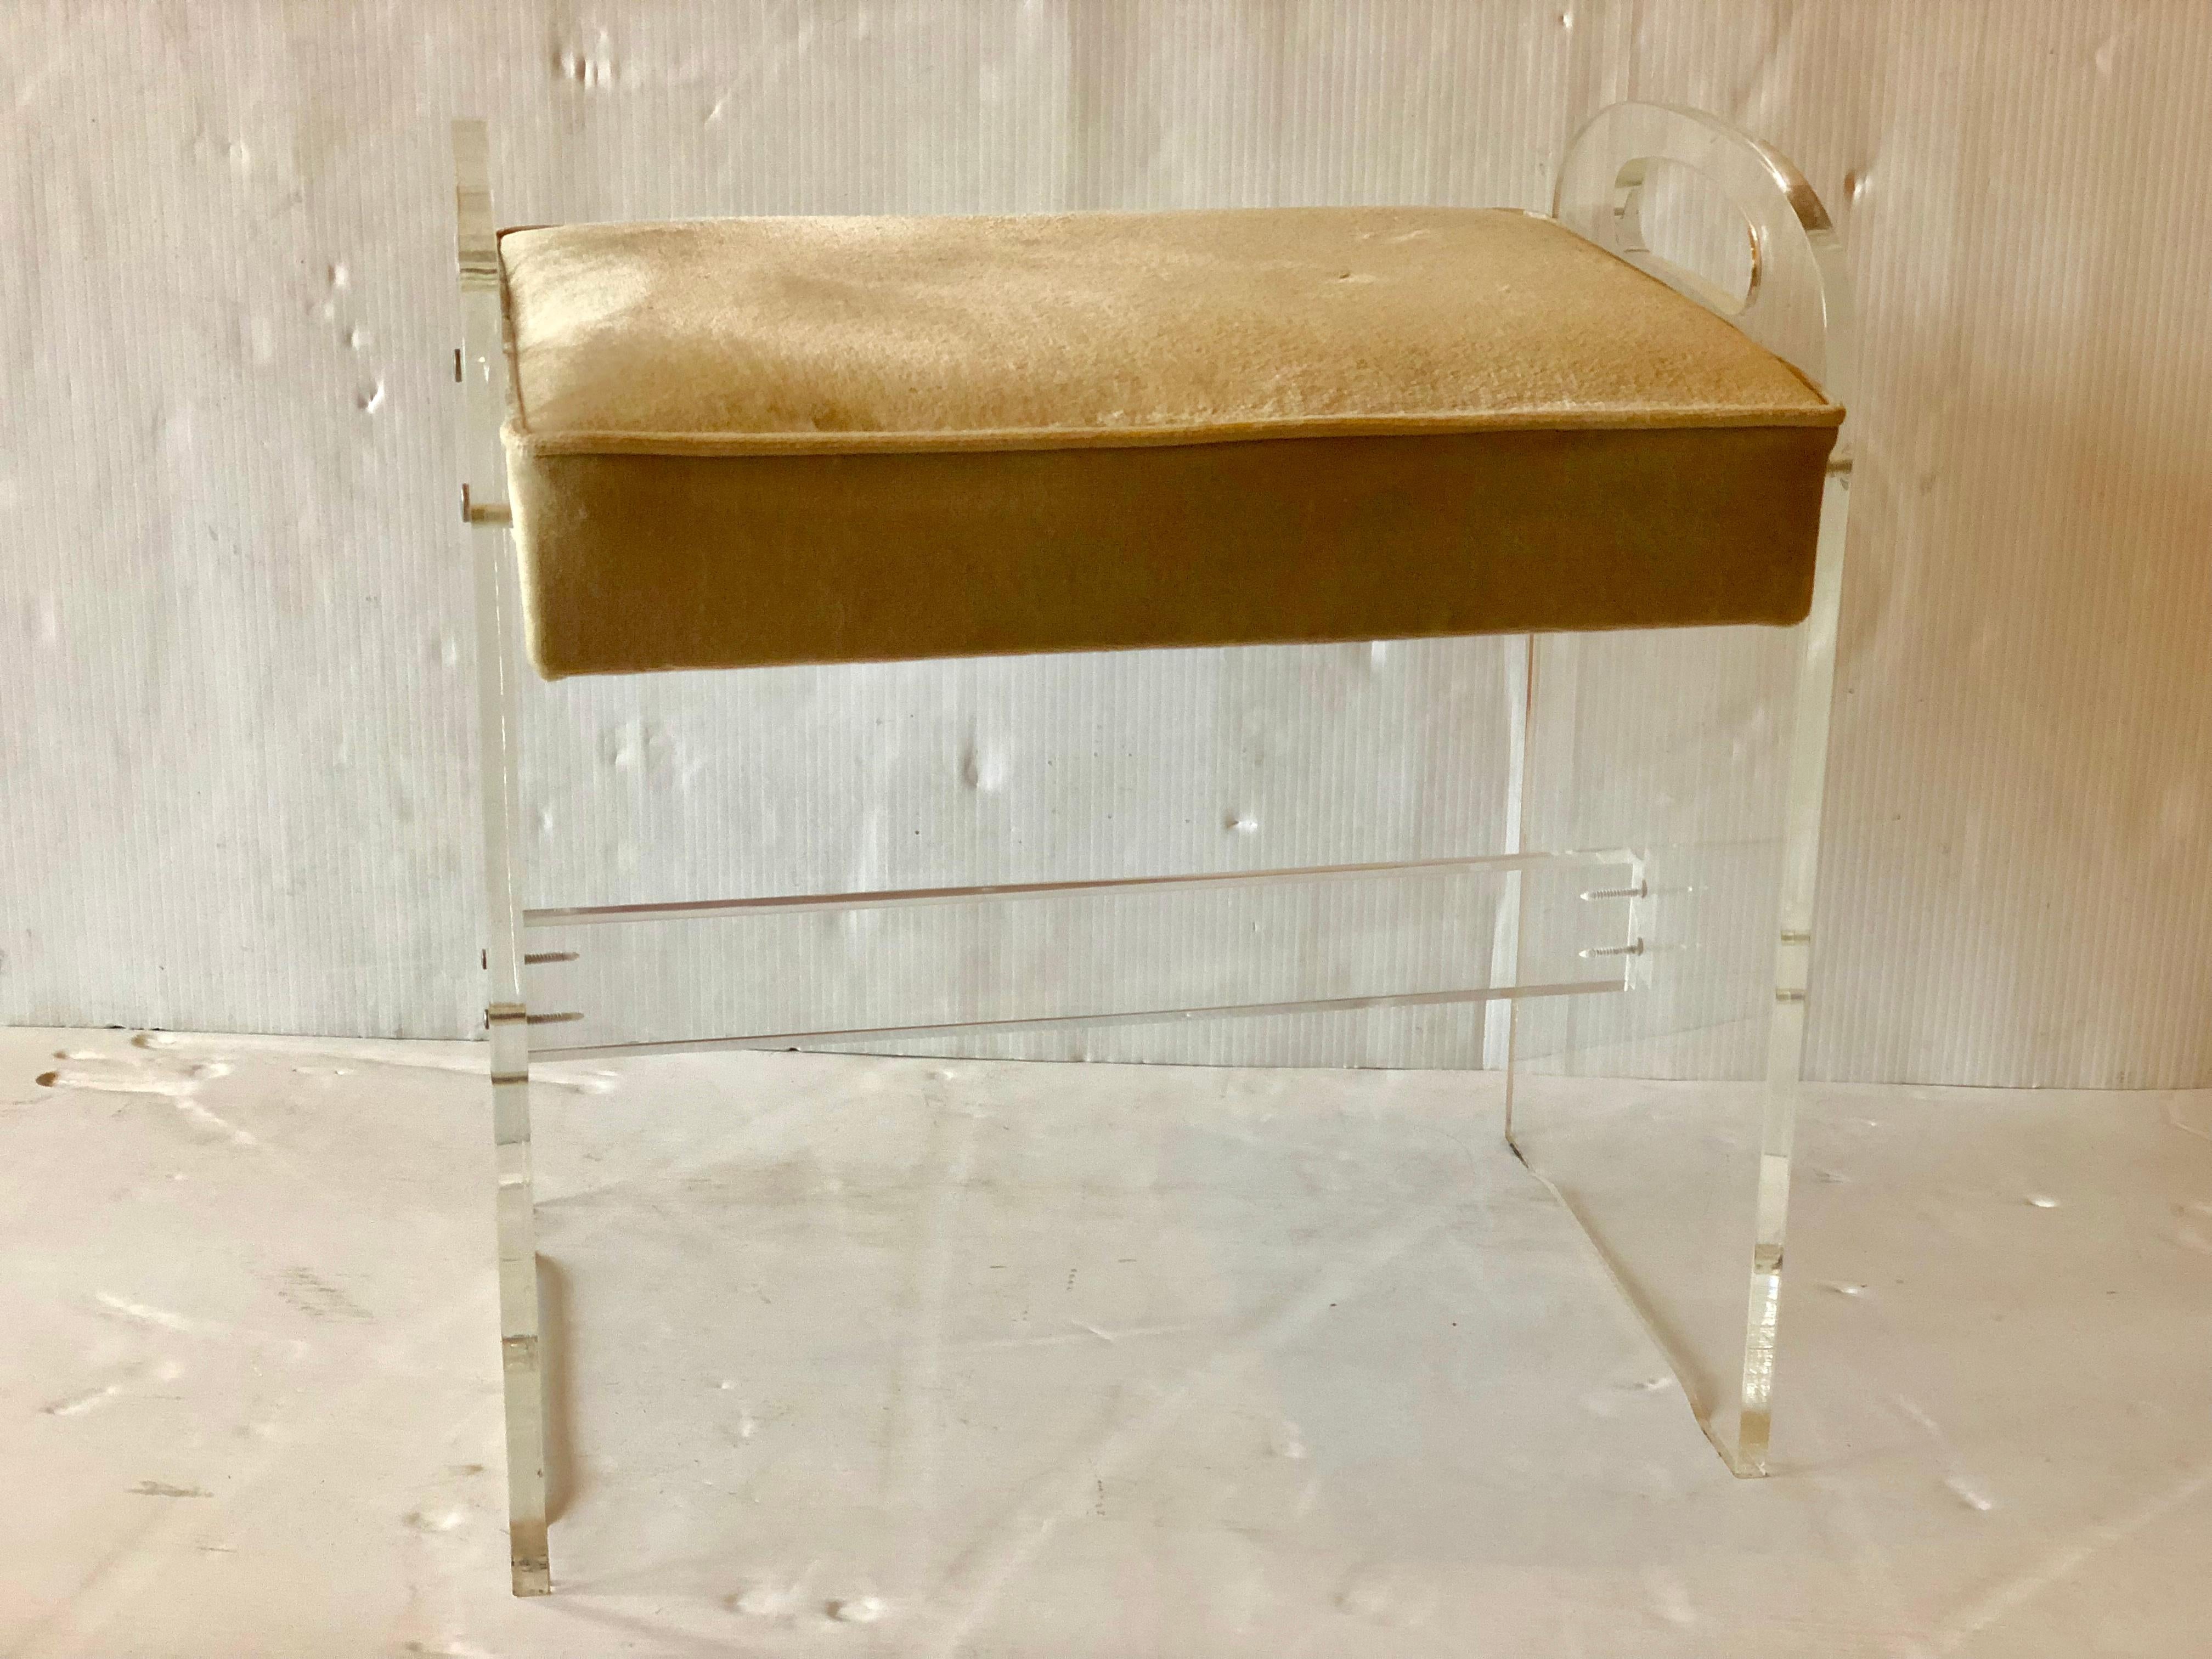 Versatile solid Lucite vanity stool, with side handles, circa 1970s. In white Naugahyde nice and clean condition original fabric cream velvet light wear.